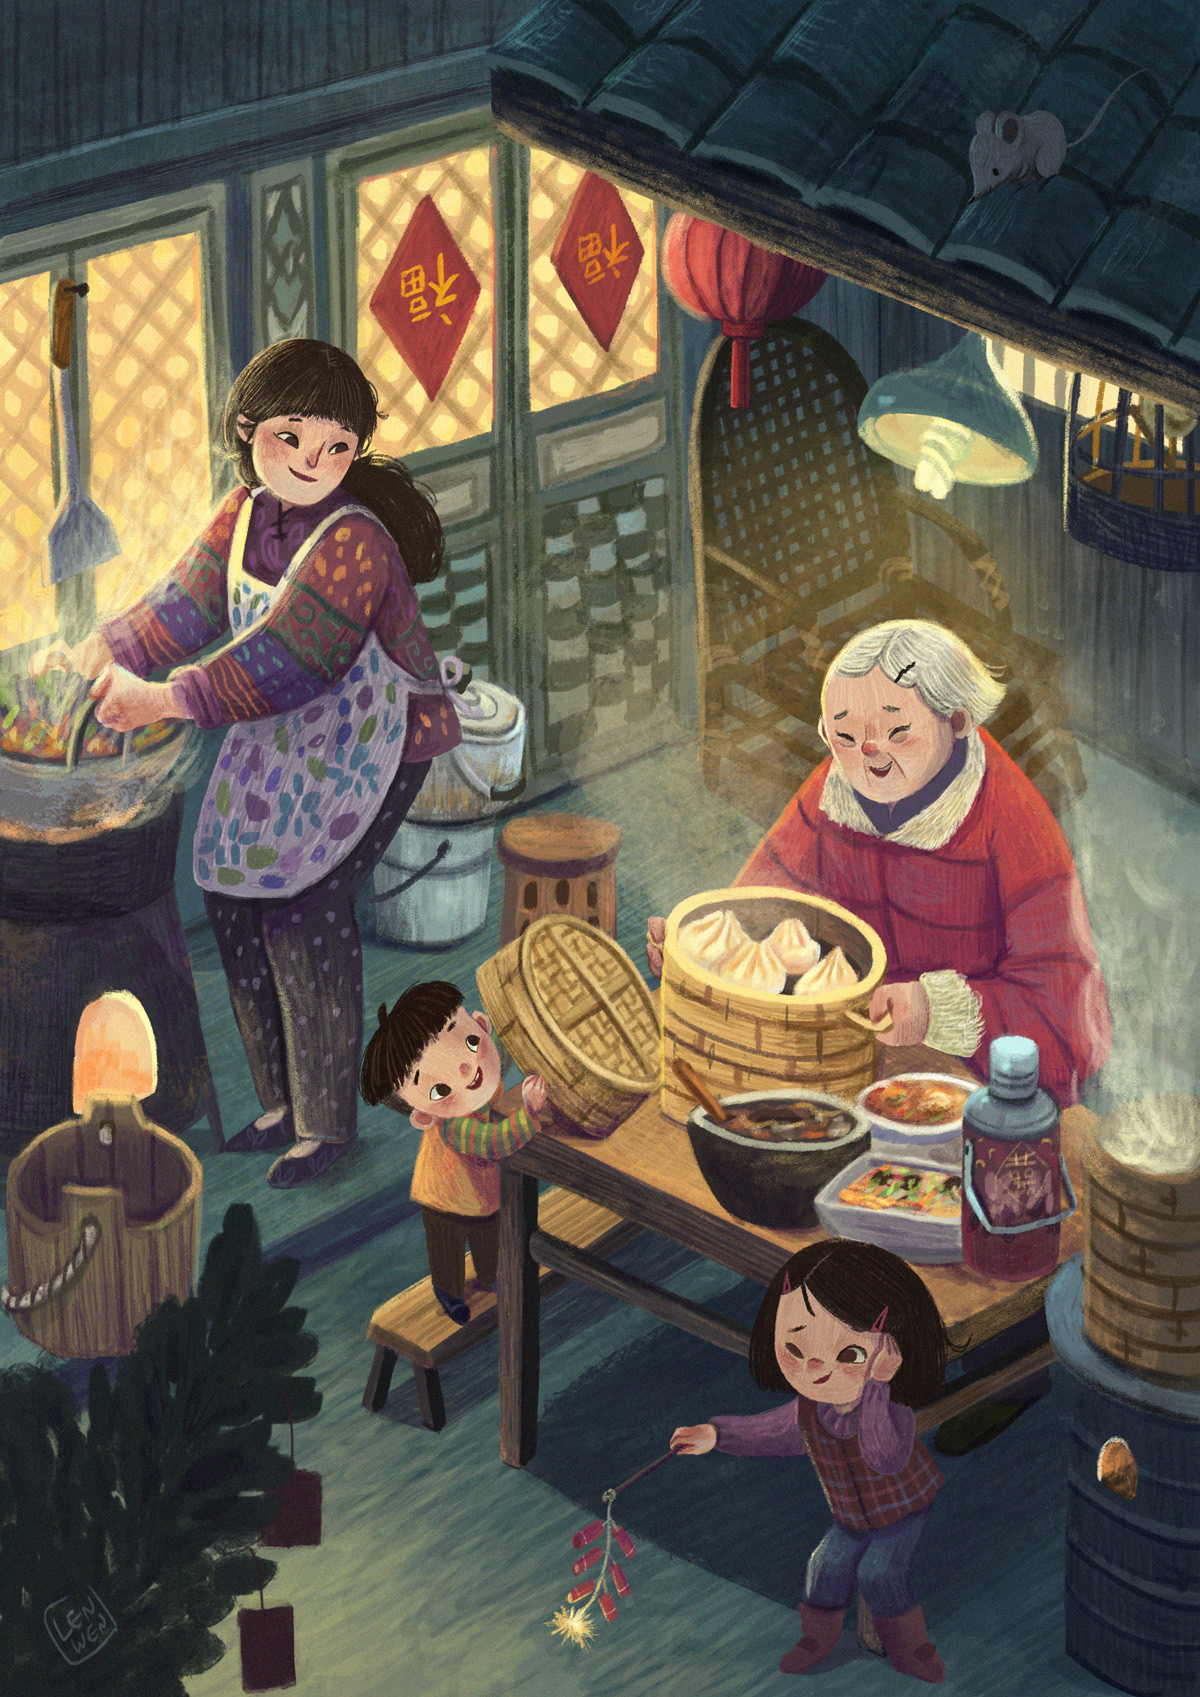 Lunar New Year chinese new year new year family cooking festive children illustration kidlit children children's illustration